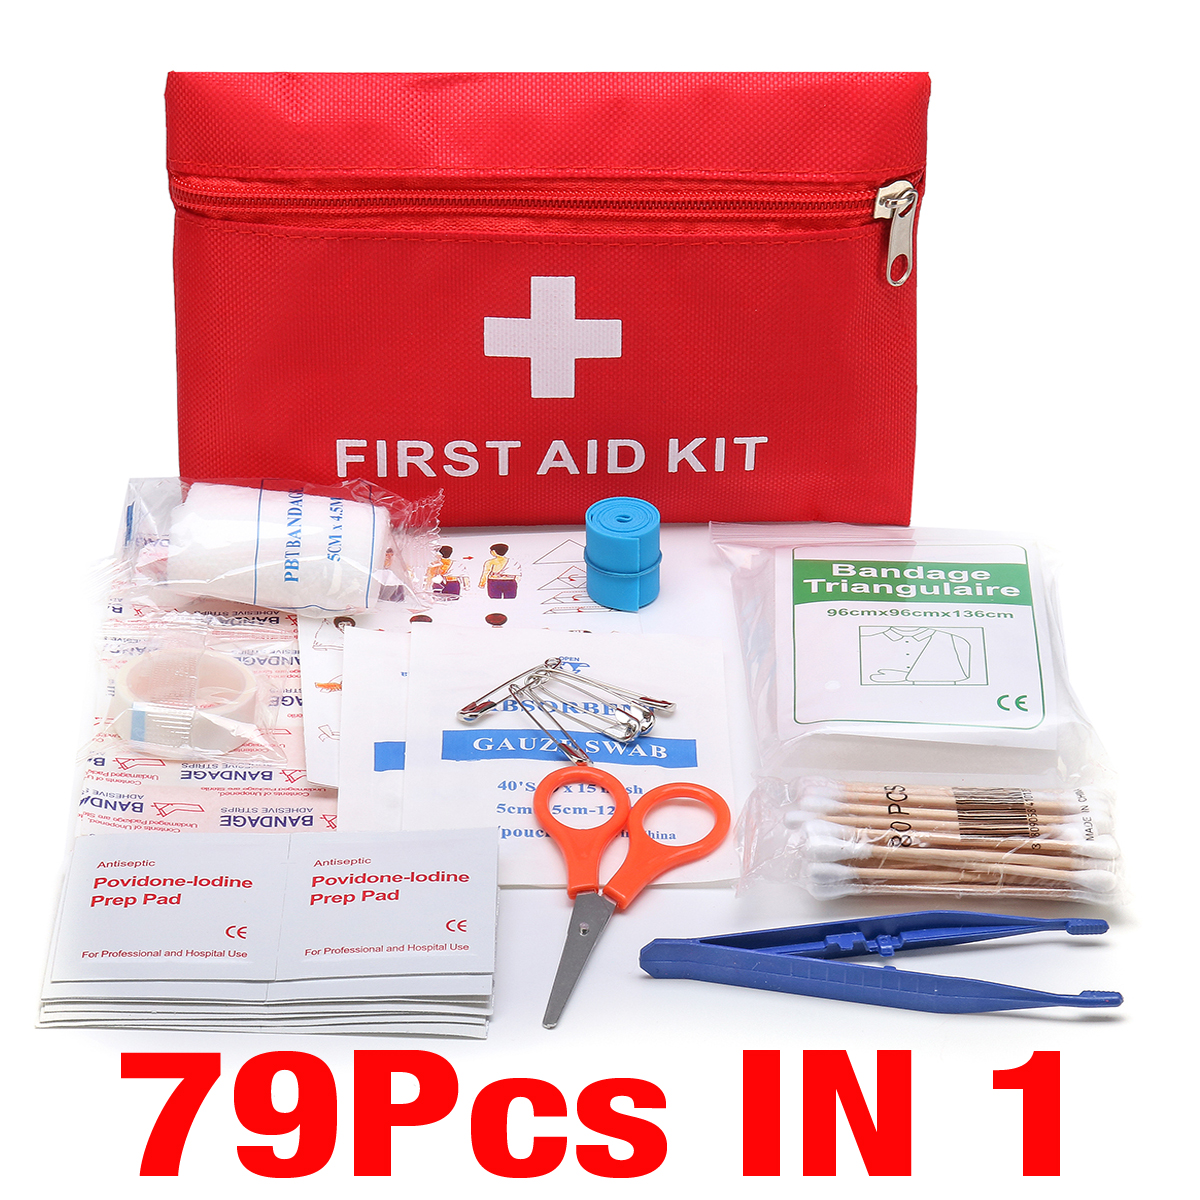 Emergency-First-Aid-Kit-79-Piece-Survival-Supplies-Bag-for-Car-Travel-Home-Emergency-Box-1420491-3